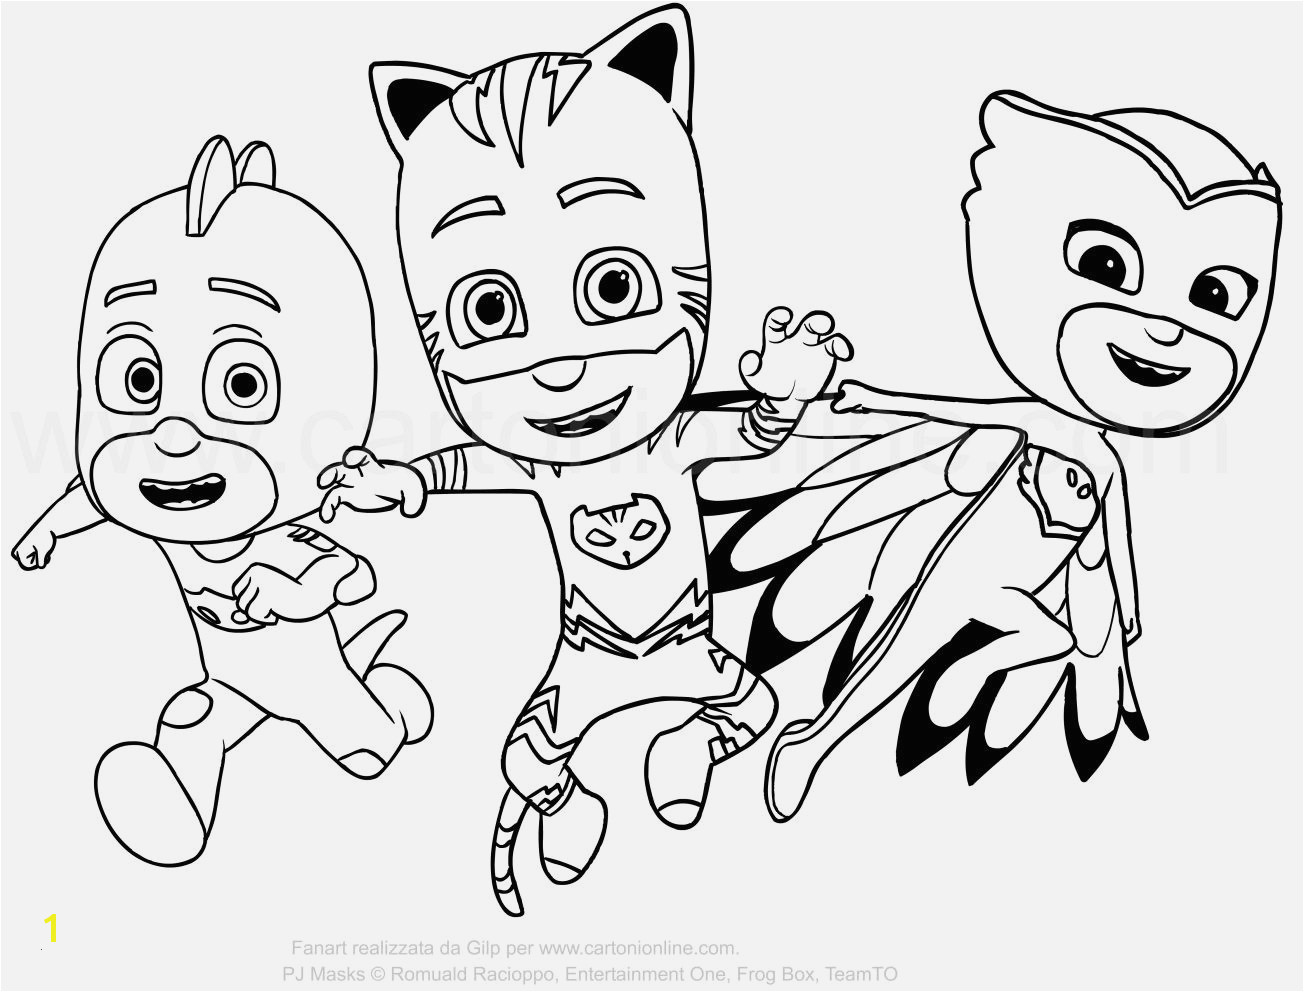 Coloring Pages Of Pj Masks Dinotrux Ausmalbilder Bilder Zum Ausmalen Bekommen Pj Mask Coloring